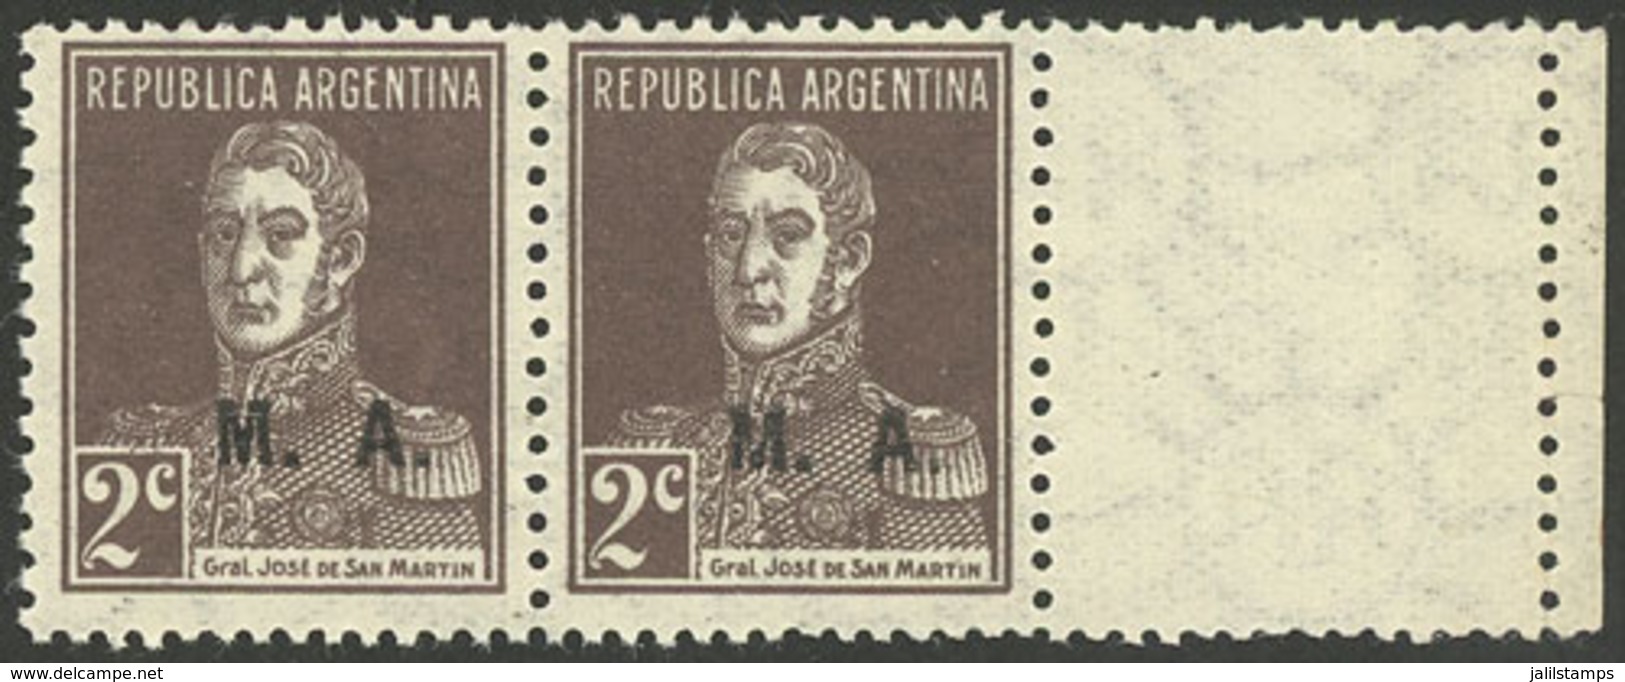 ARGENTINA: GJ.89CD, Pair WITH LABEL AT RIGHT, MNH (+50%), Superb! - Service